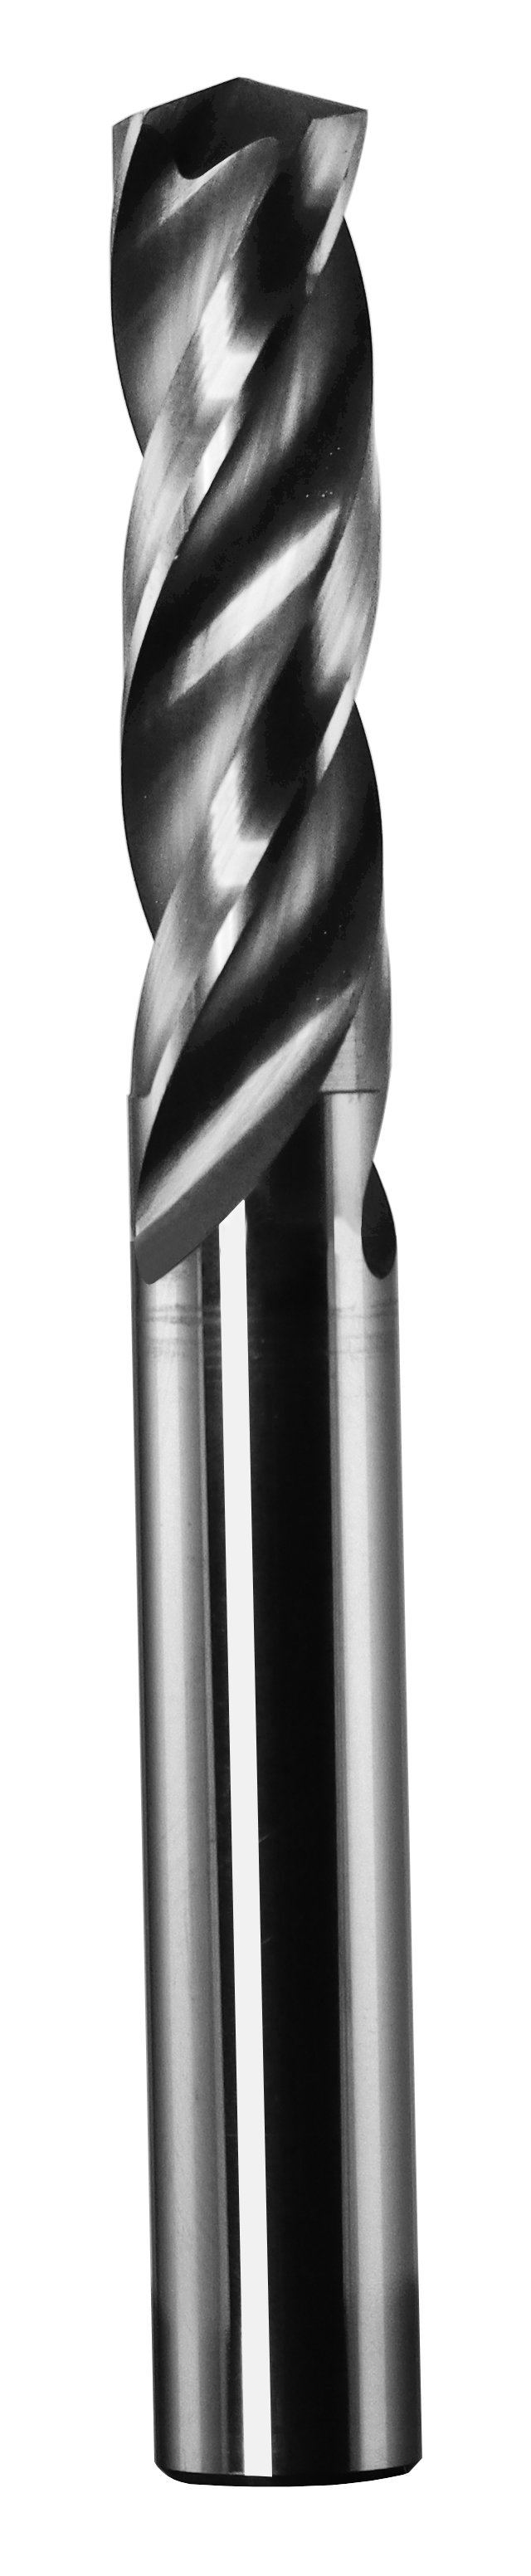 3.80mm Dia, 150 Degree Point, Solid Carbide Drill - 63048